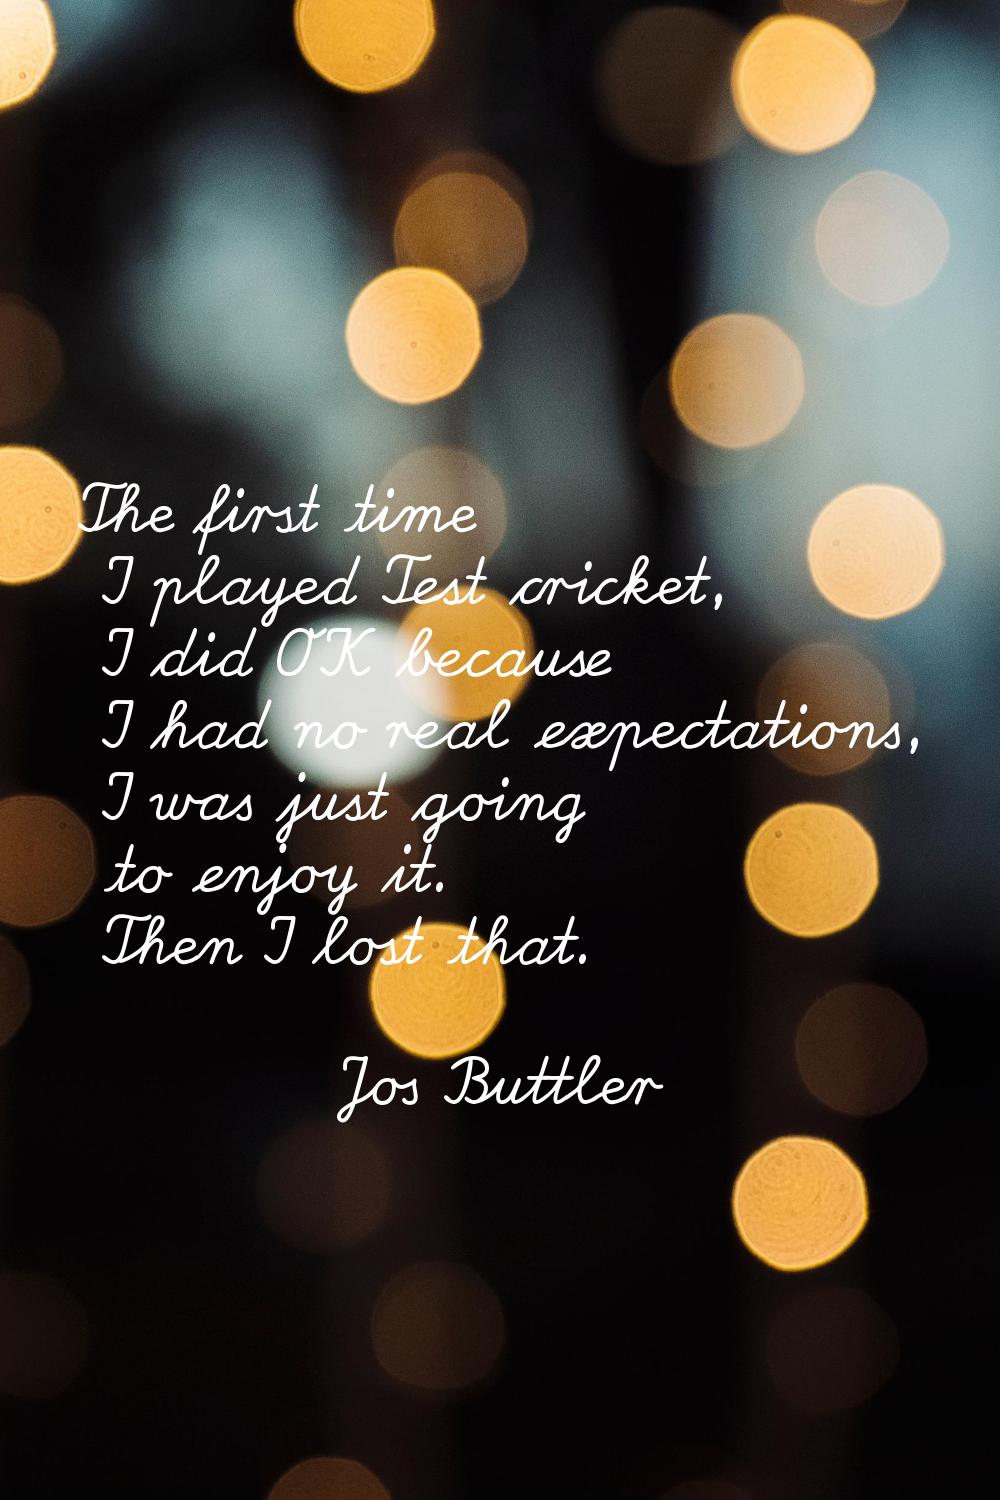 The first time I played Test cricket, I did OK because I had no real expectations, I was just going